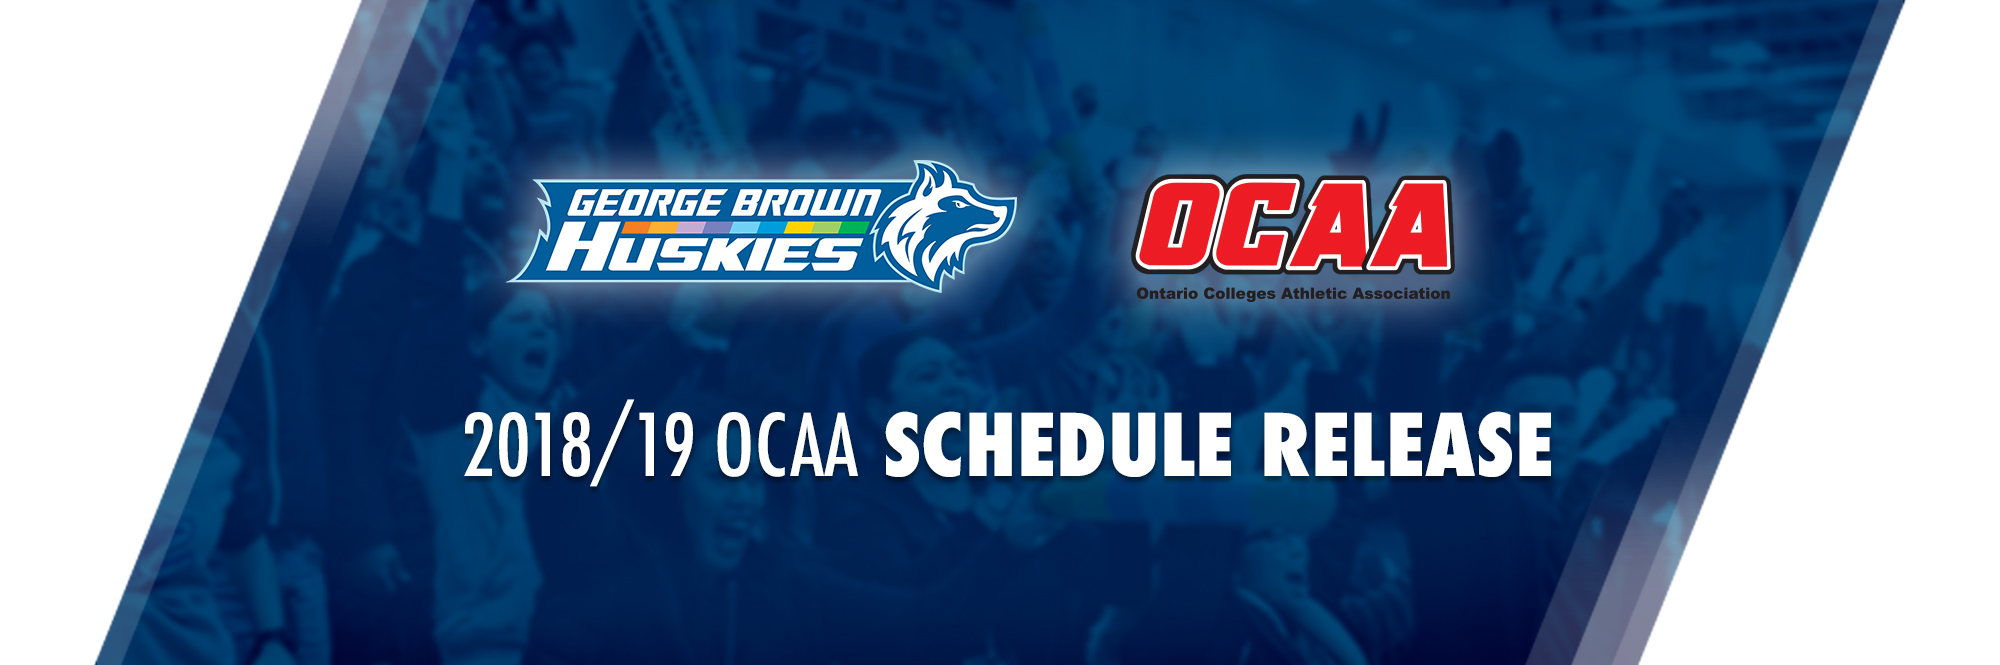 OCAA RELEASES 2018/19 LEAGUE AND TOURNAMENT SPORT SCHEDULES